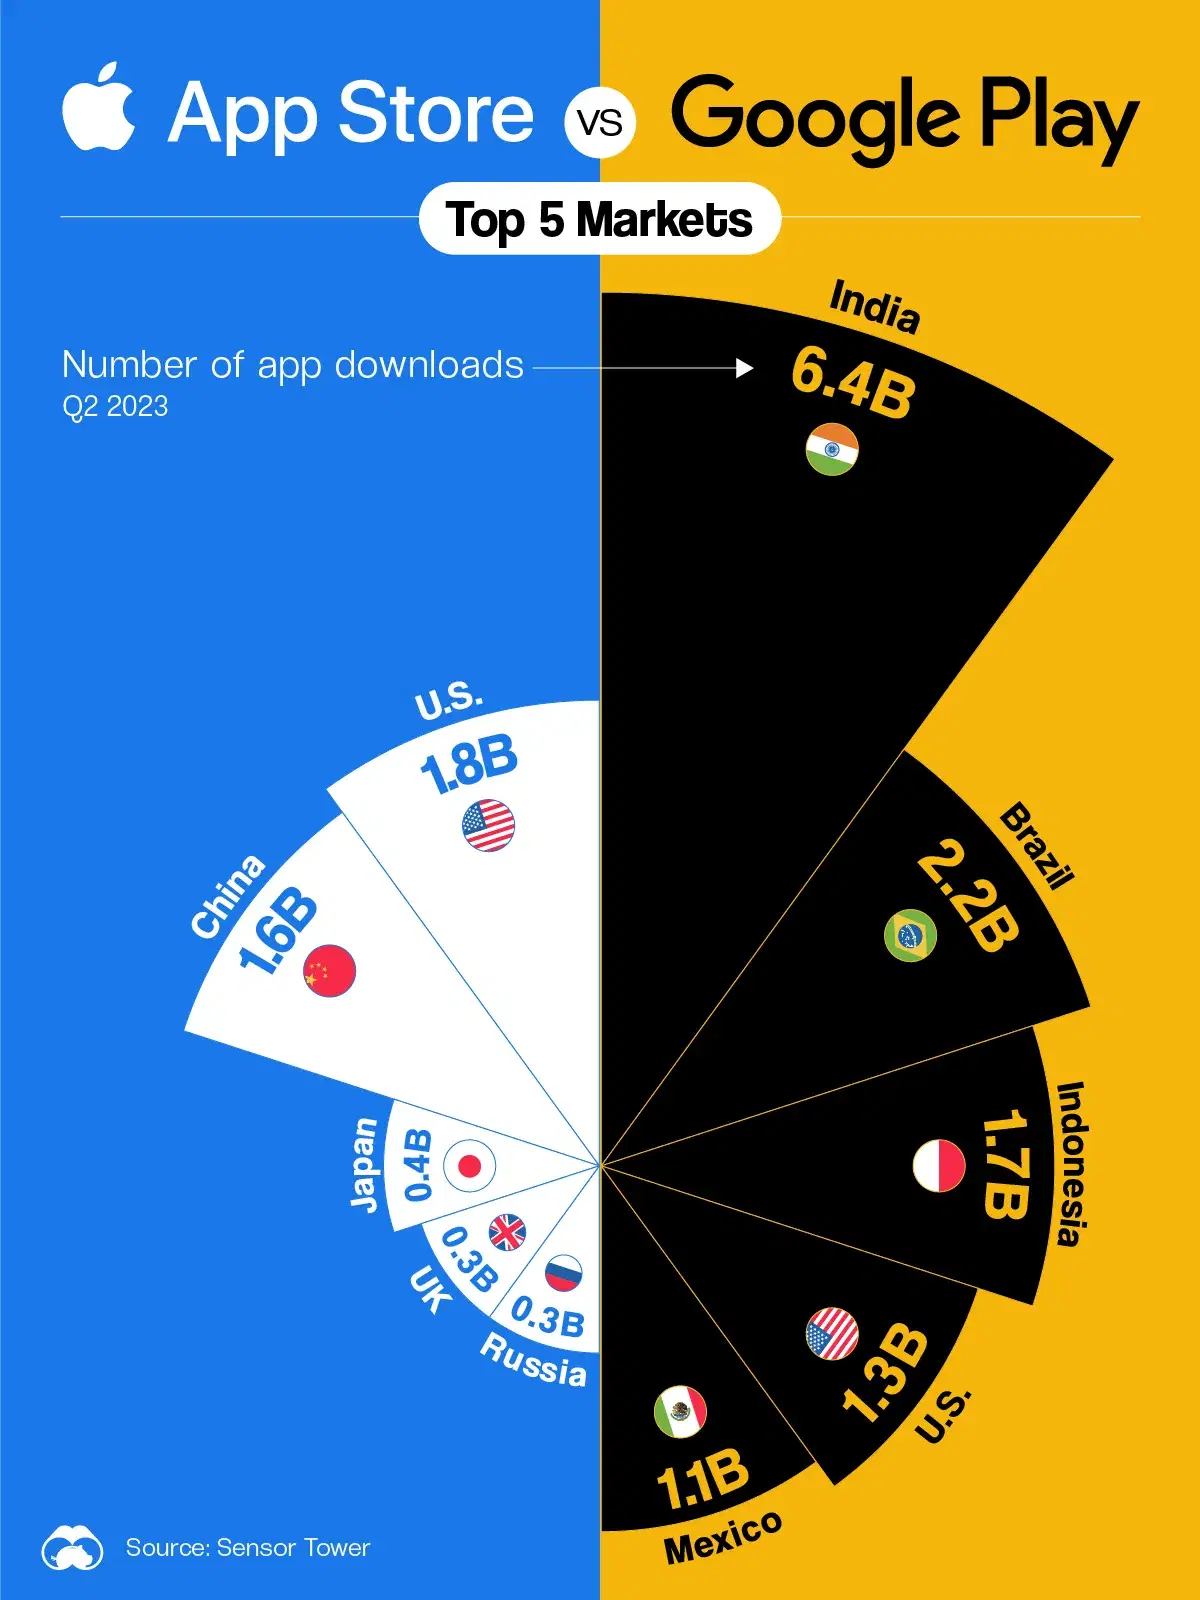 Where Apple and Google’s App Stores Are Most Popular